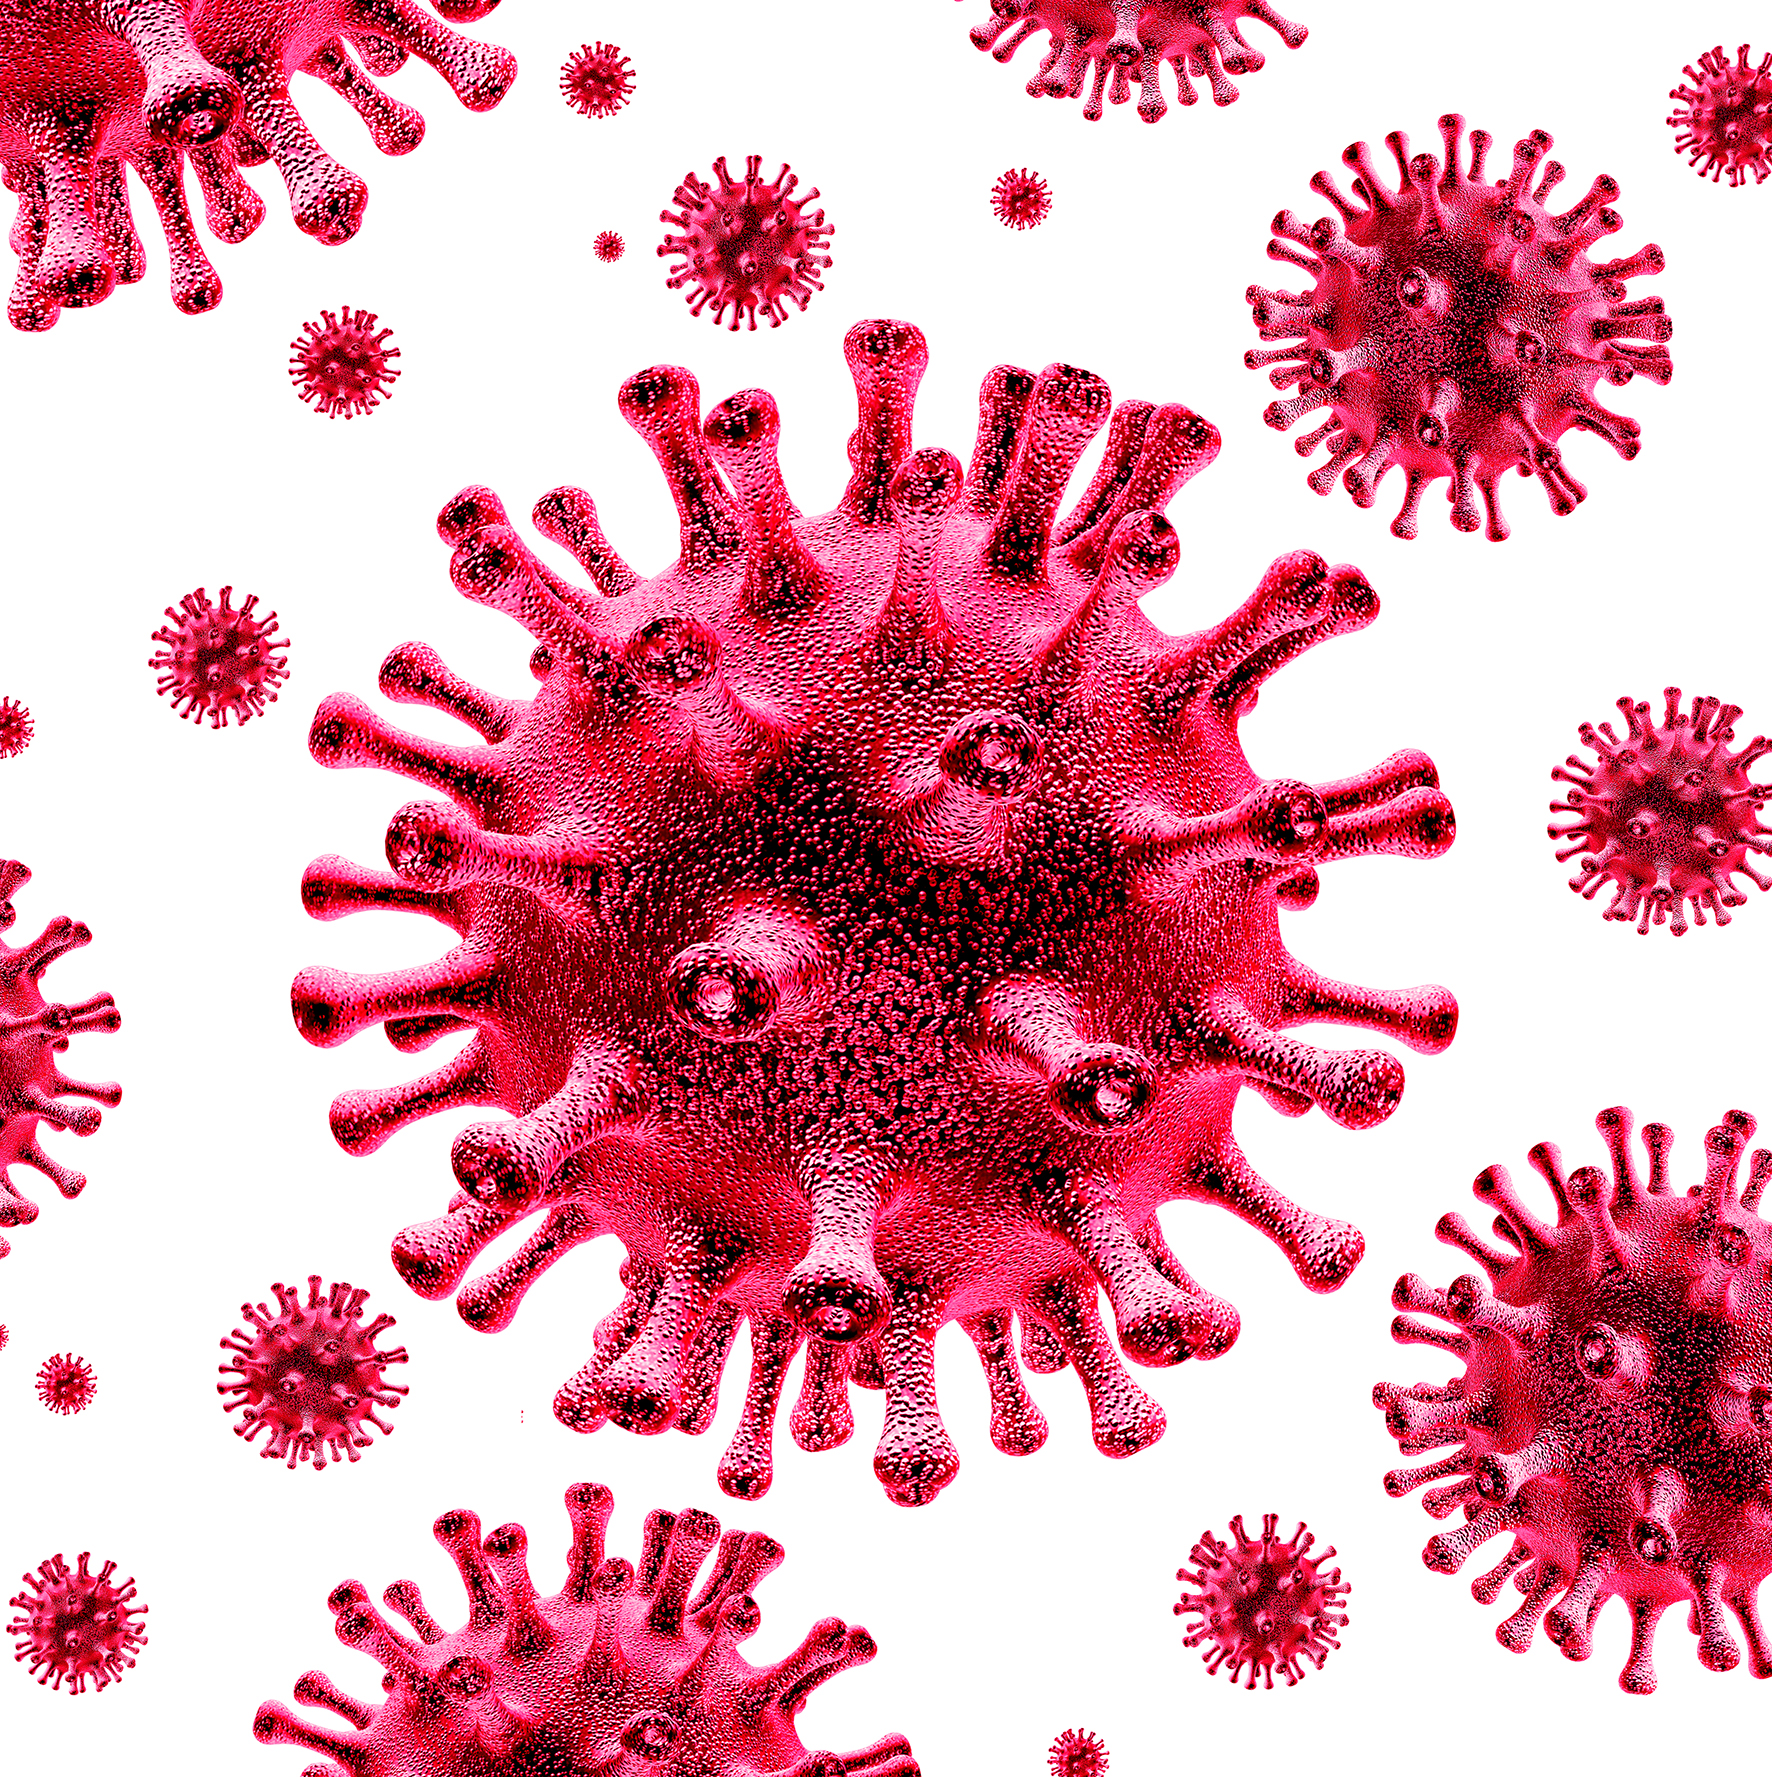 Coronavirus Outbreak Isolated On White And Coronaviruses Influenza Background As Dangerous Flu Strain Cases As A Pandemic Medical Health Risk Concept With Disease Cells As A 3D Render.